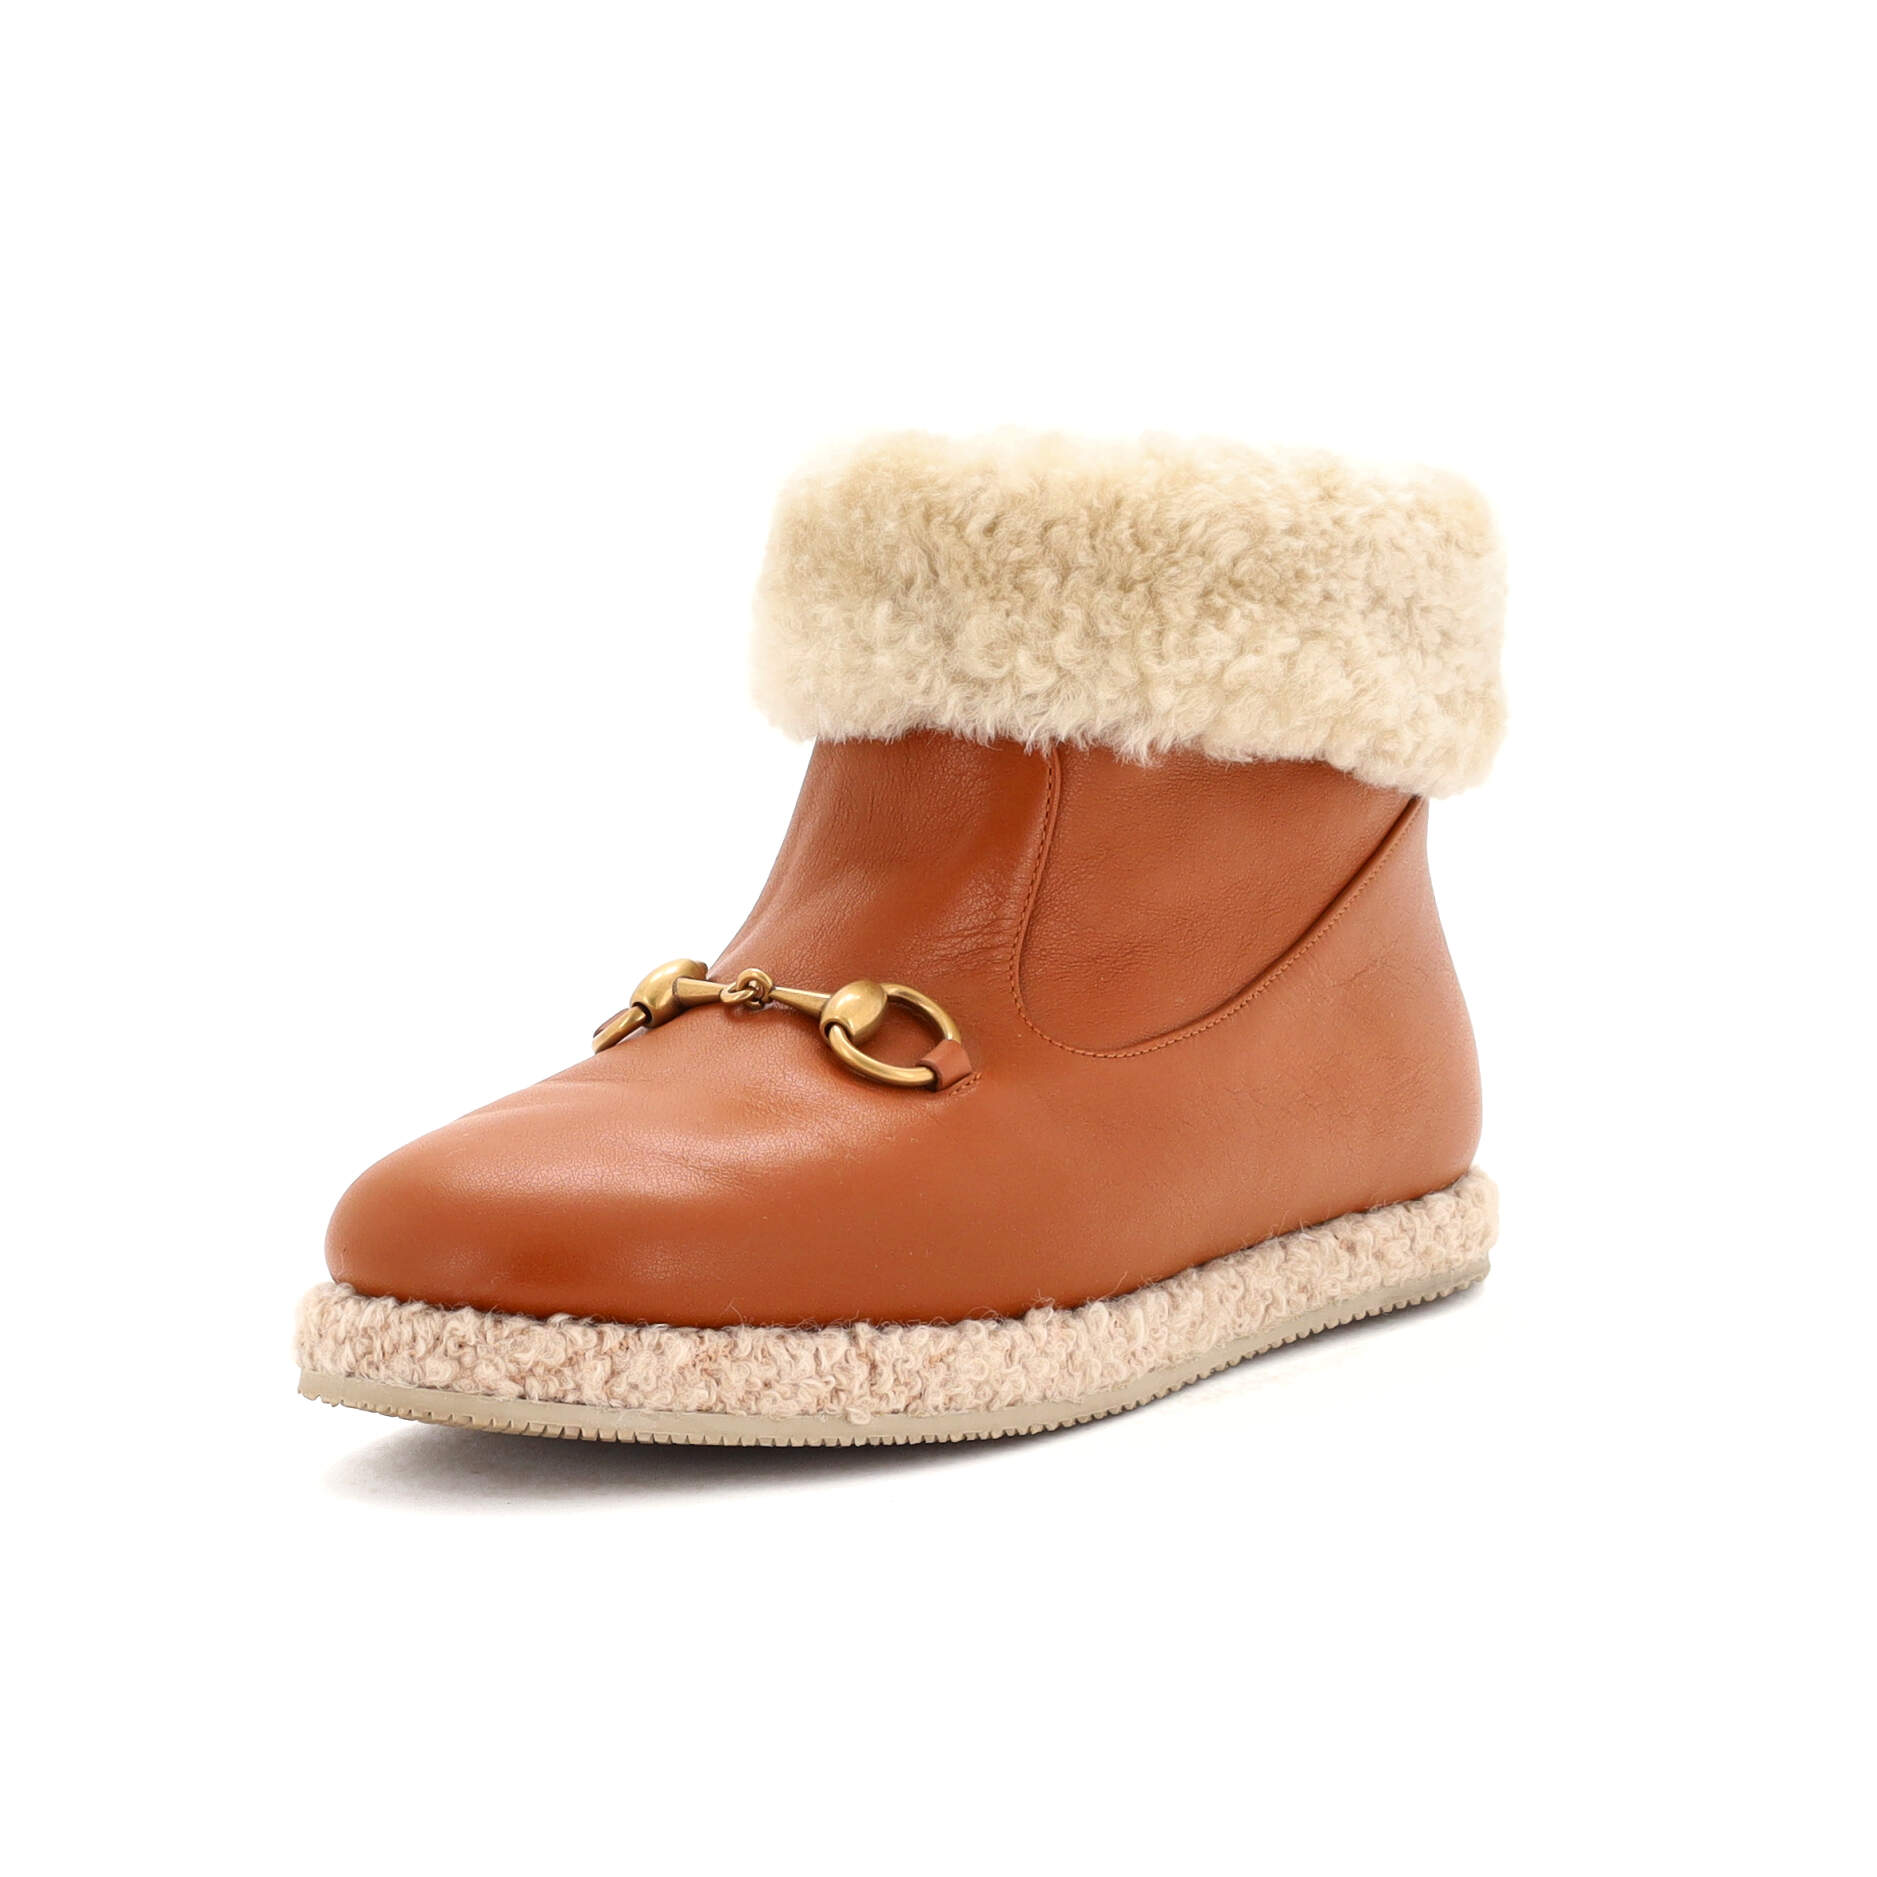 Women's Fria Horsebit Ankle Boots Leather with Shearling